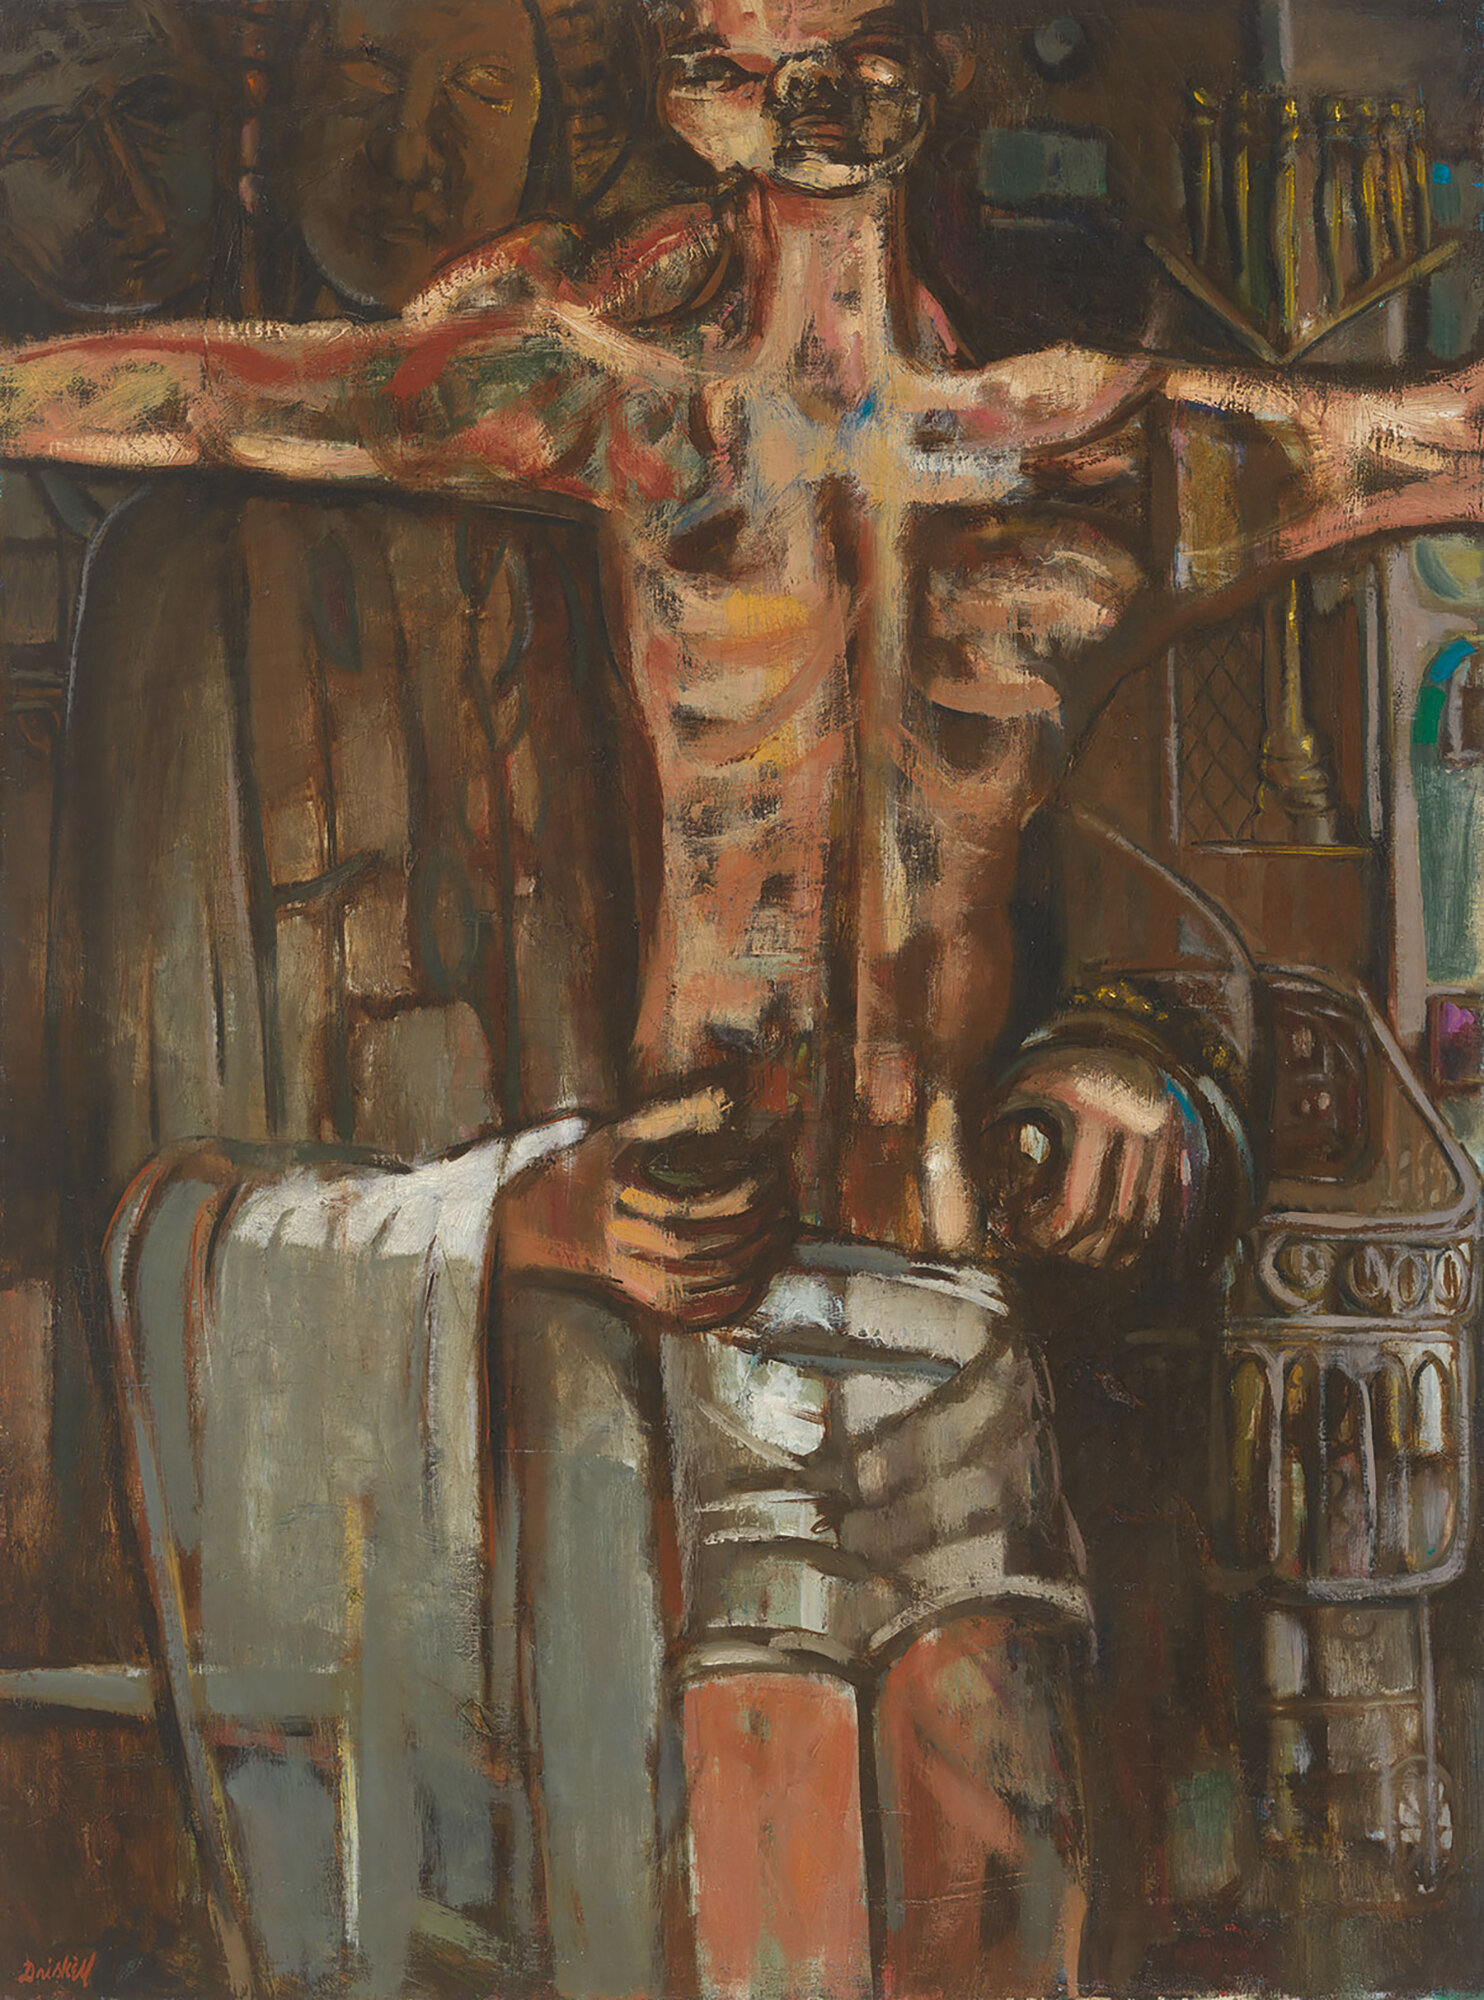  David C. Driskell (United States, 1931–2020),  Behold Thy Son , 1956, oil on canvas, 40 x 30 inches. Collection of the Smithsonian National Museum of African American History and Culture, Washington, DC. © Estate of David C. Driskell 